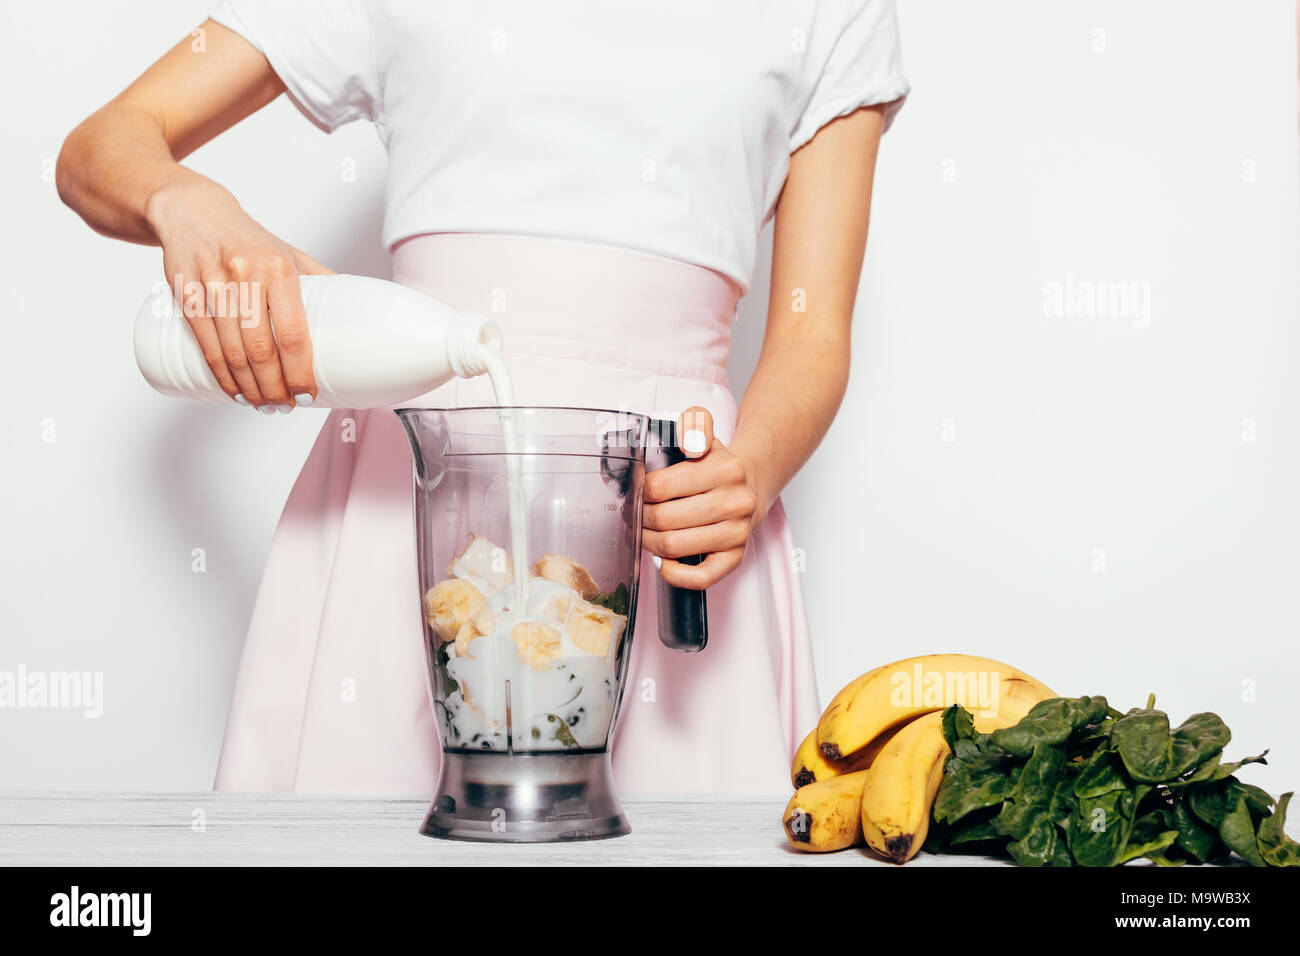 https://c8.alamy.com/comp/M9WB3X/young-woman-making-spinach-banana-smoothie-on-white-background-she-pouring-milk-in-blender-and-mix-ingredients-together-simple-elegant-picture-with-M9WB3X.jpg